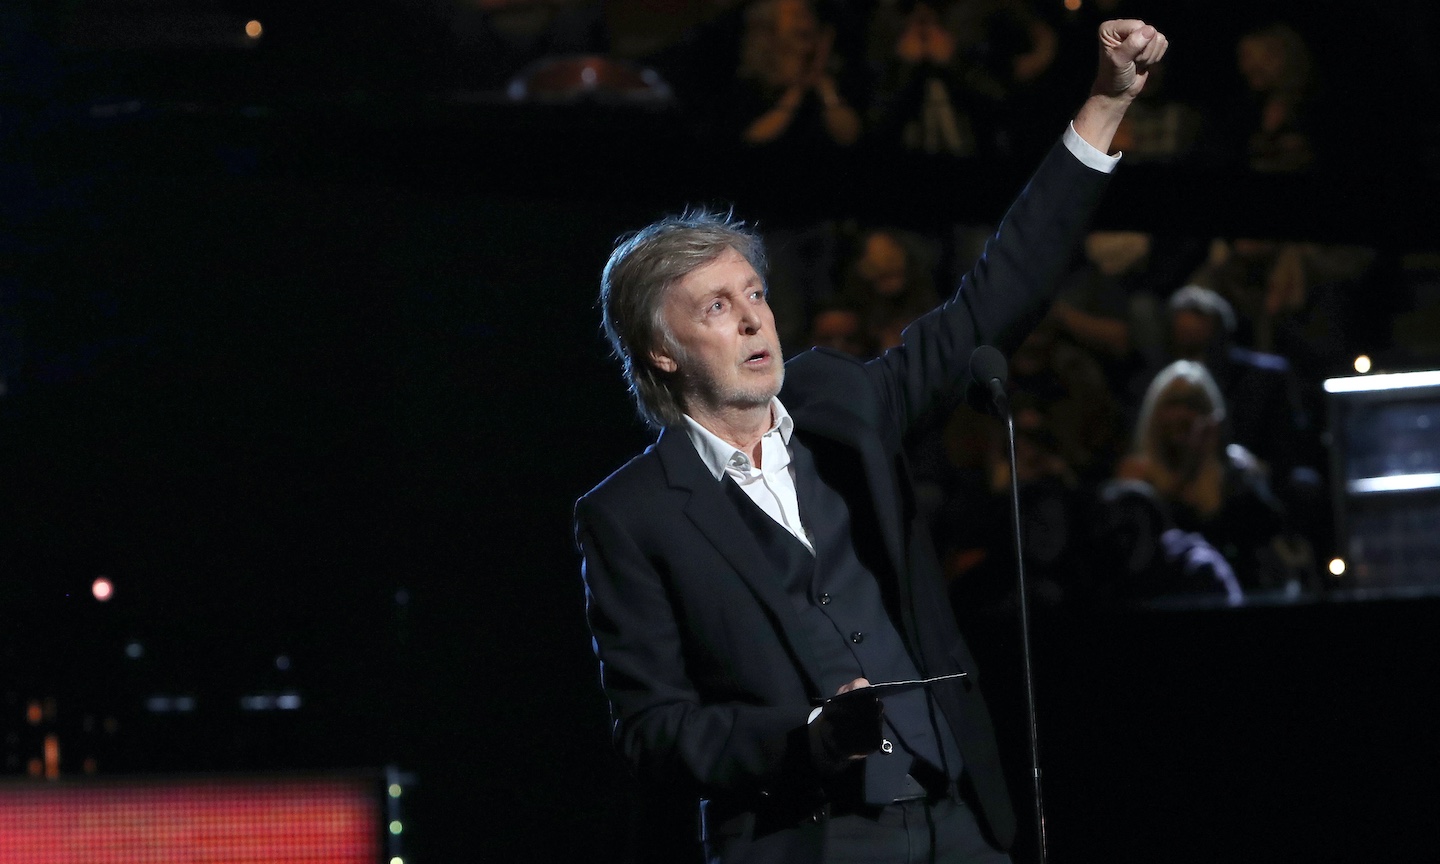 Paul McCartney has confirmed a brand new date for his One On One tour in  the Czech Republic this June – O2 arena